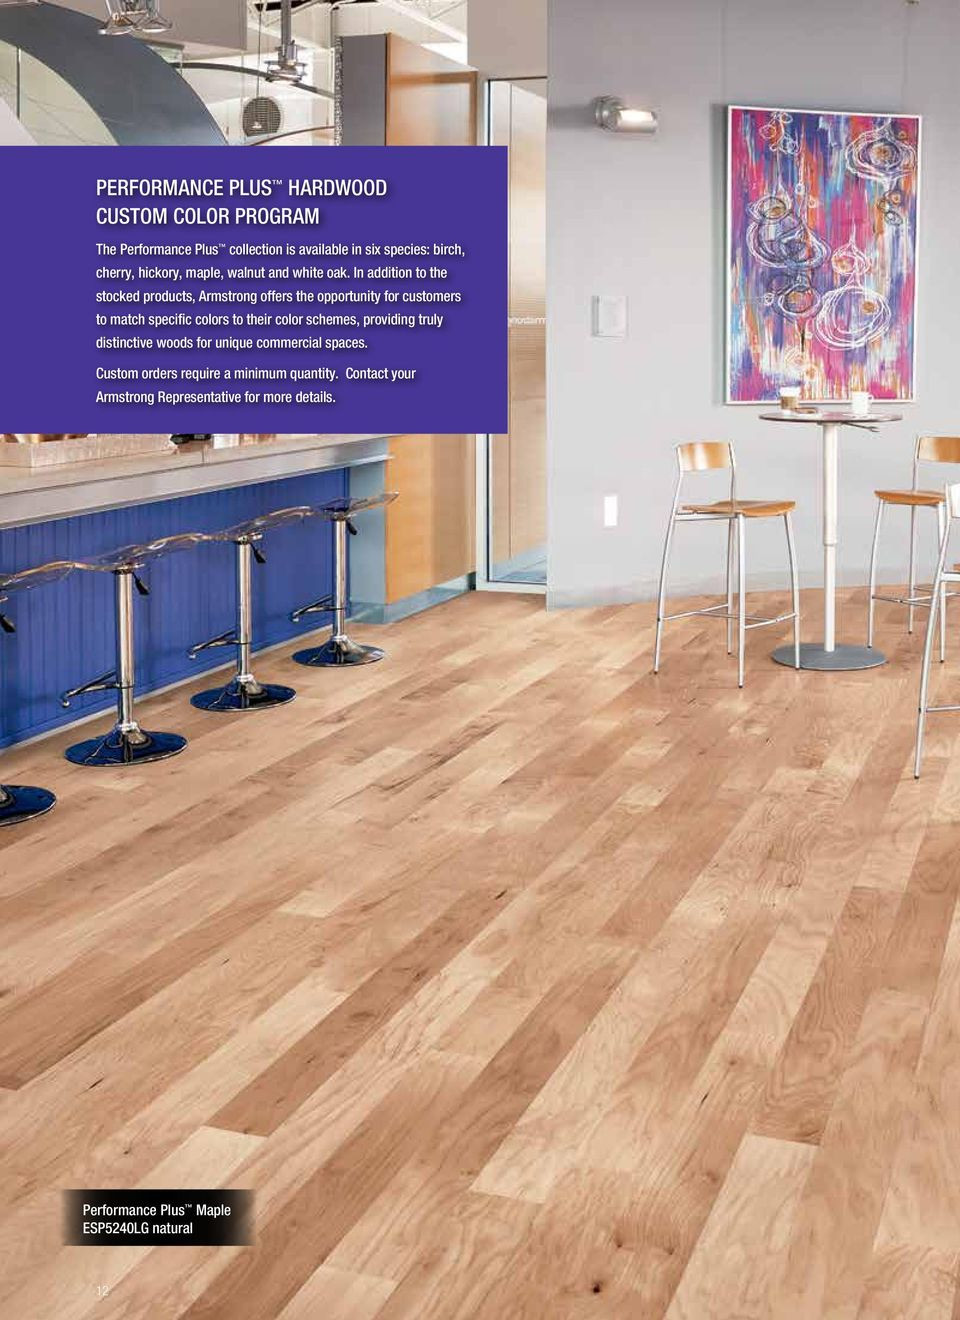 13 Best Armstrong Hardwood Laminate Floor Cleaner 2024 free download armstrong hardwood laminate floor cleaner of performance plus midtown pdf with in addition to the stocked products armstrong offers the opportunity for customers to match specific